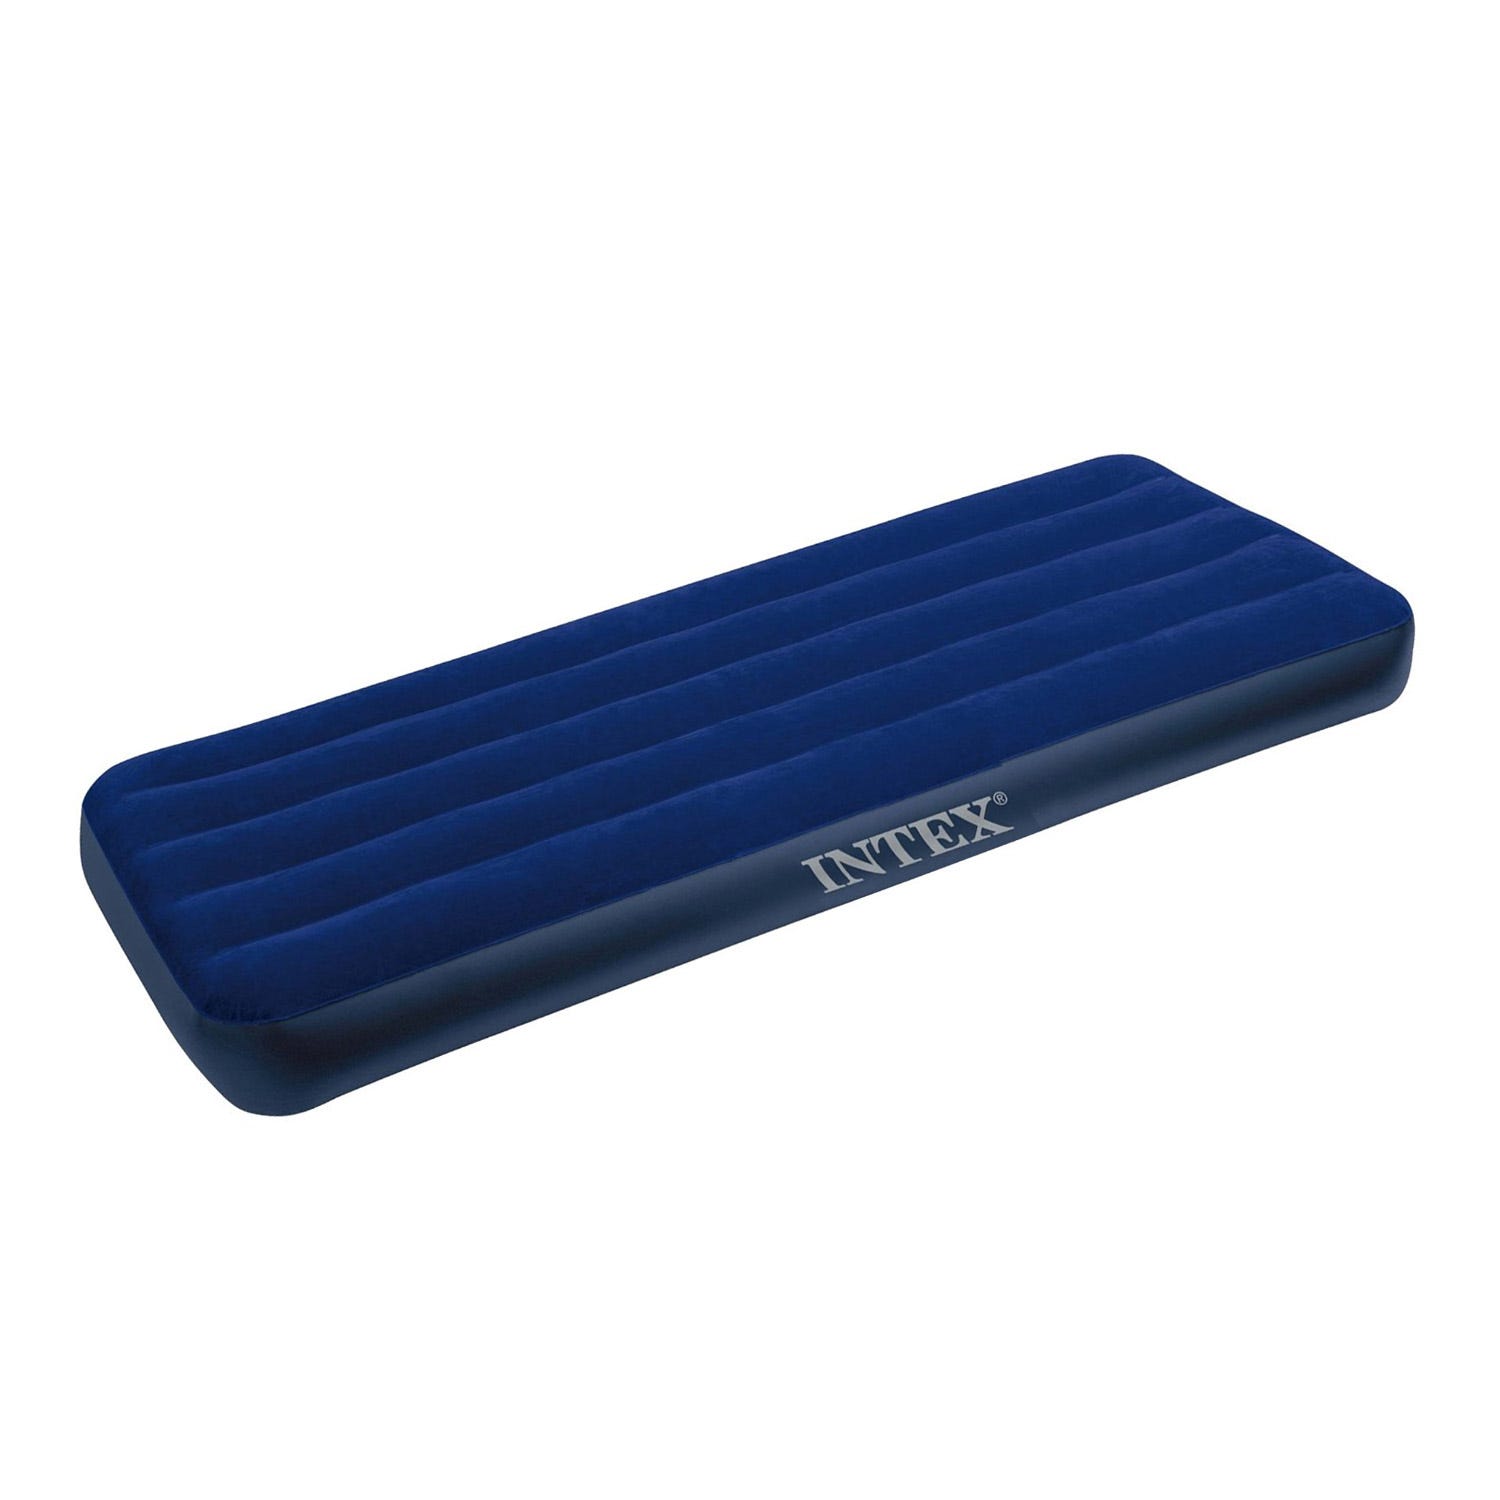 Matelas gonflable 1 personne 